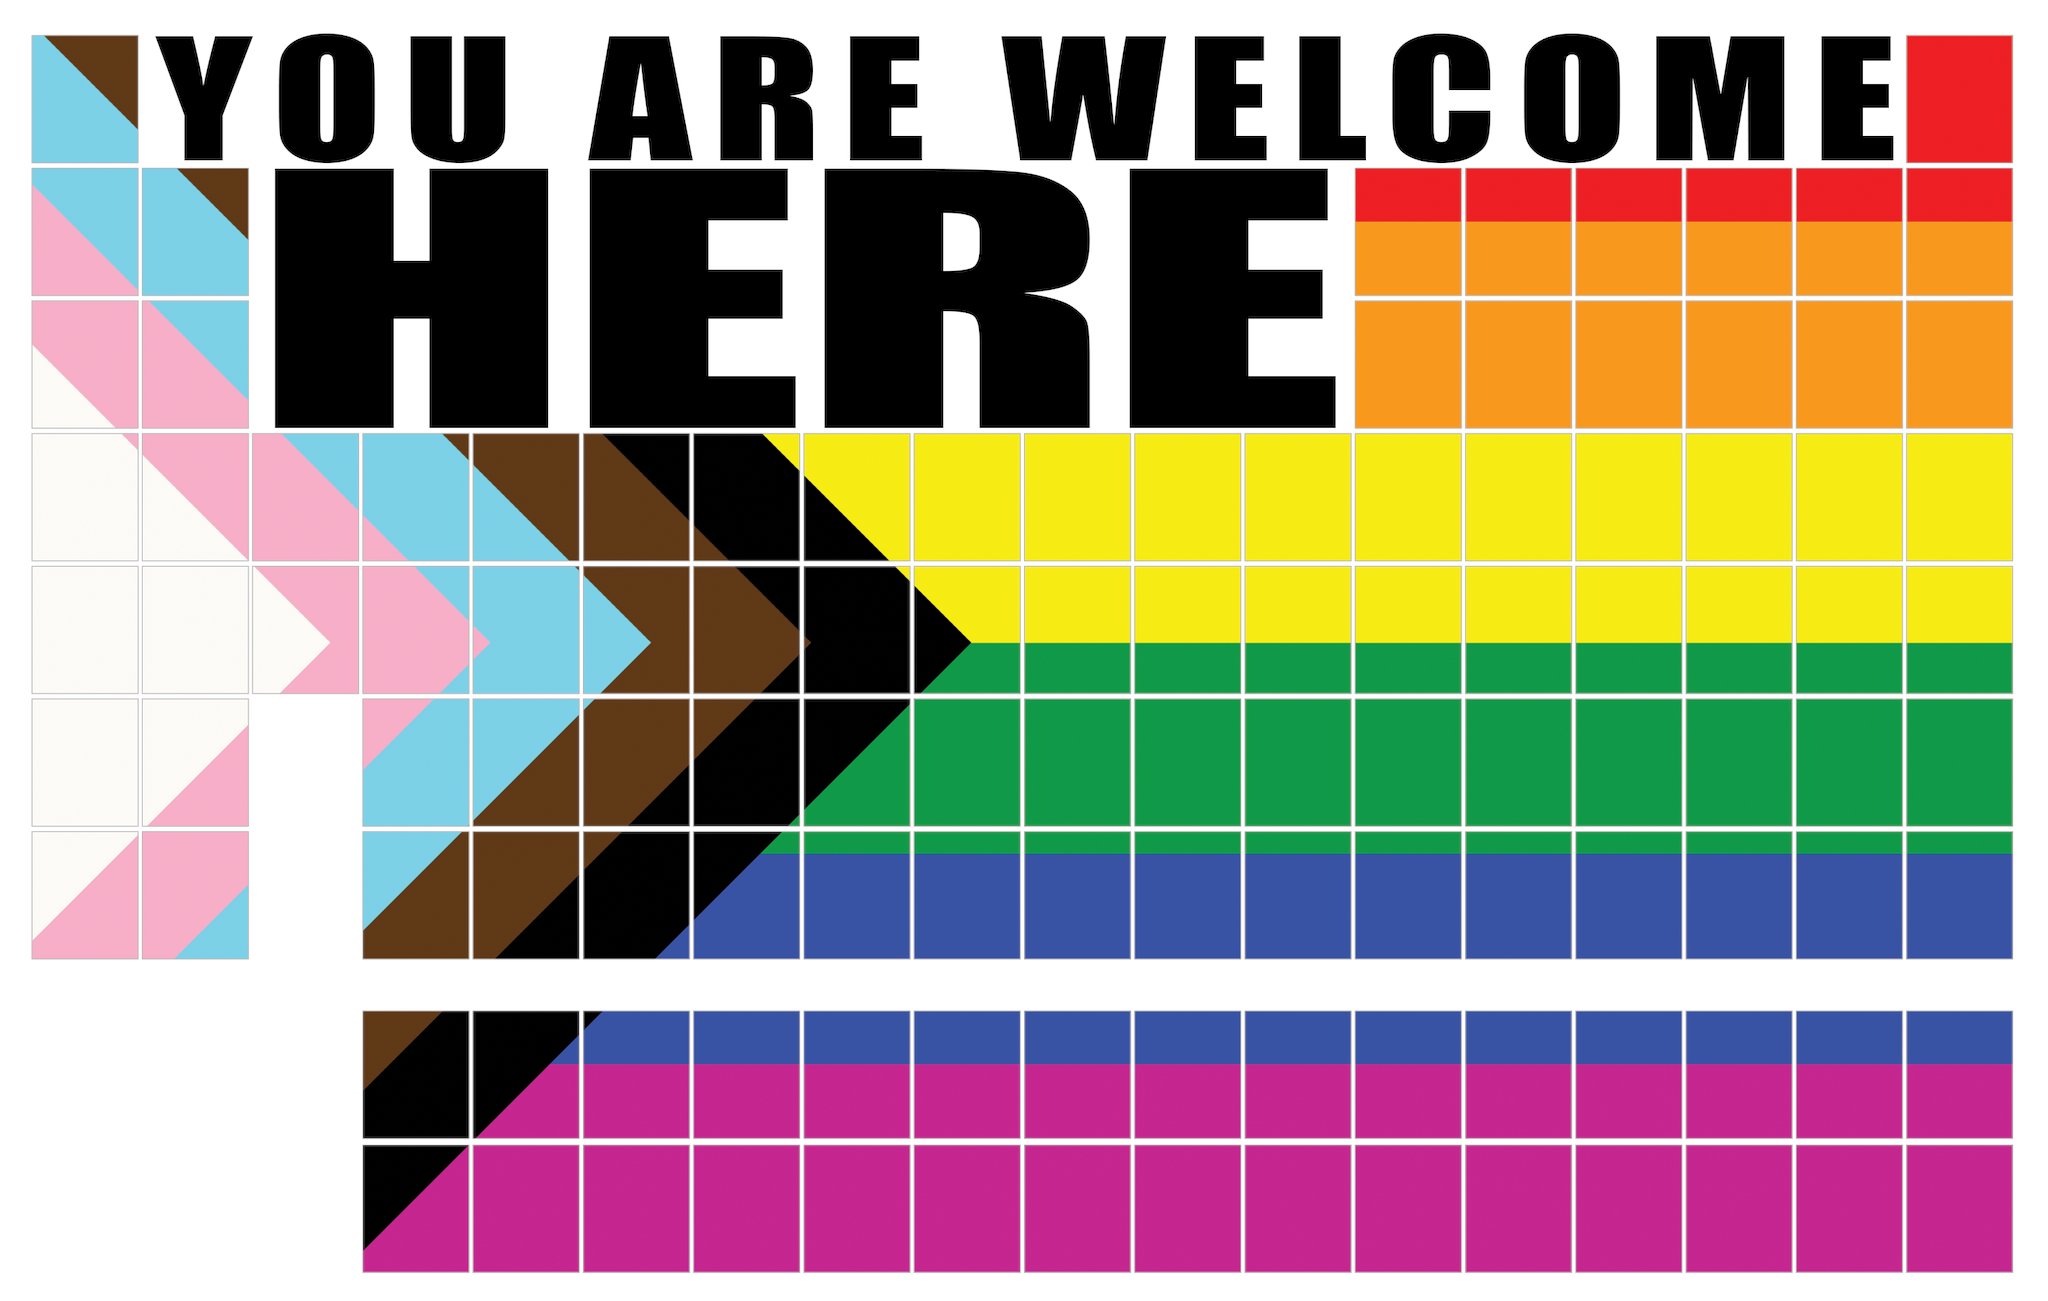 "You are welcome here" periodic table